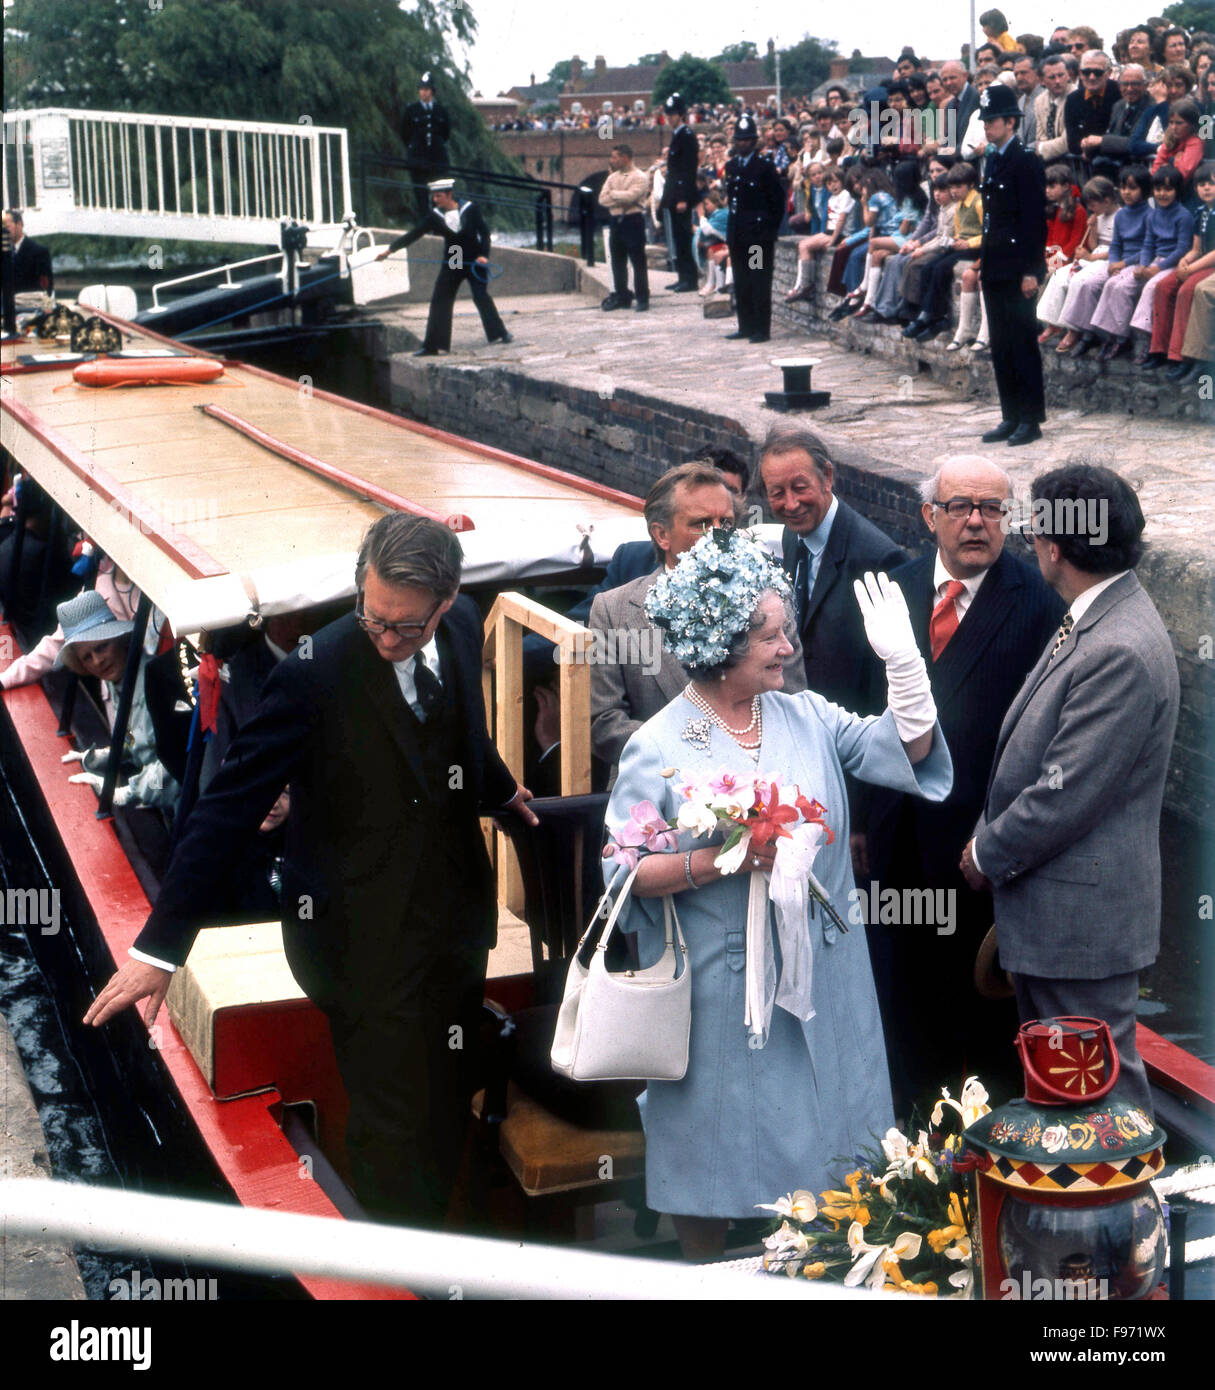 The Upper Avon canal was officially reopened by HM Queen Elizabeth the Queen Mother on June 1st 1974. With her are Robert Aickman, David Hutchings, Sir John Betjeman and Crick Grundy. Stock Photo